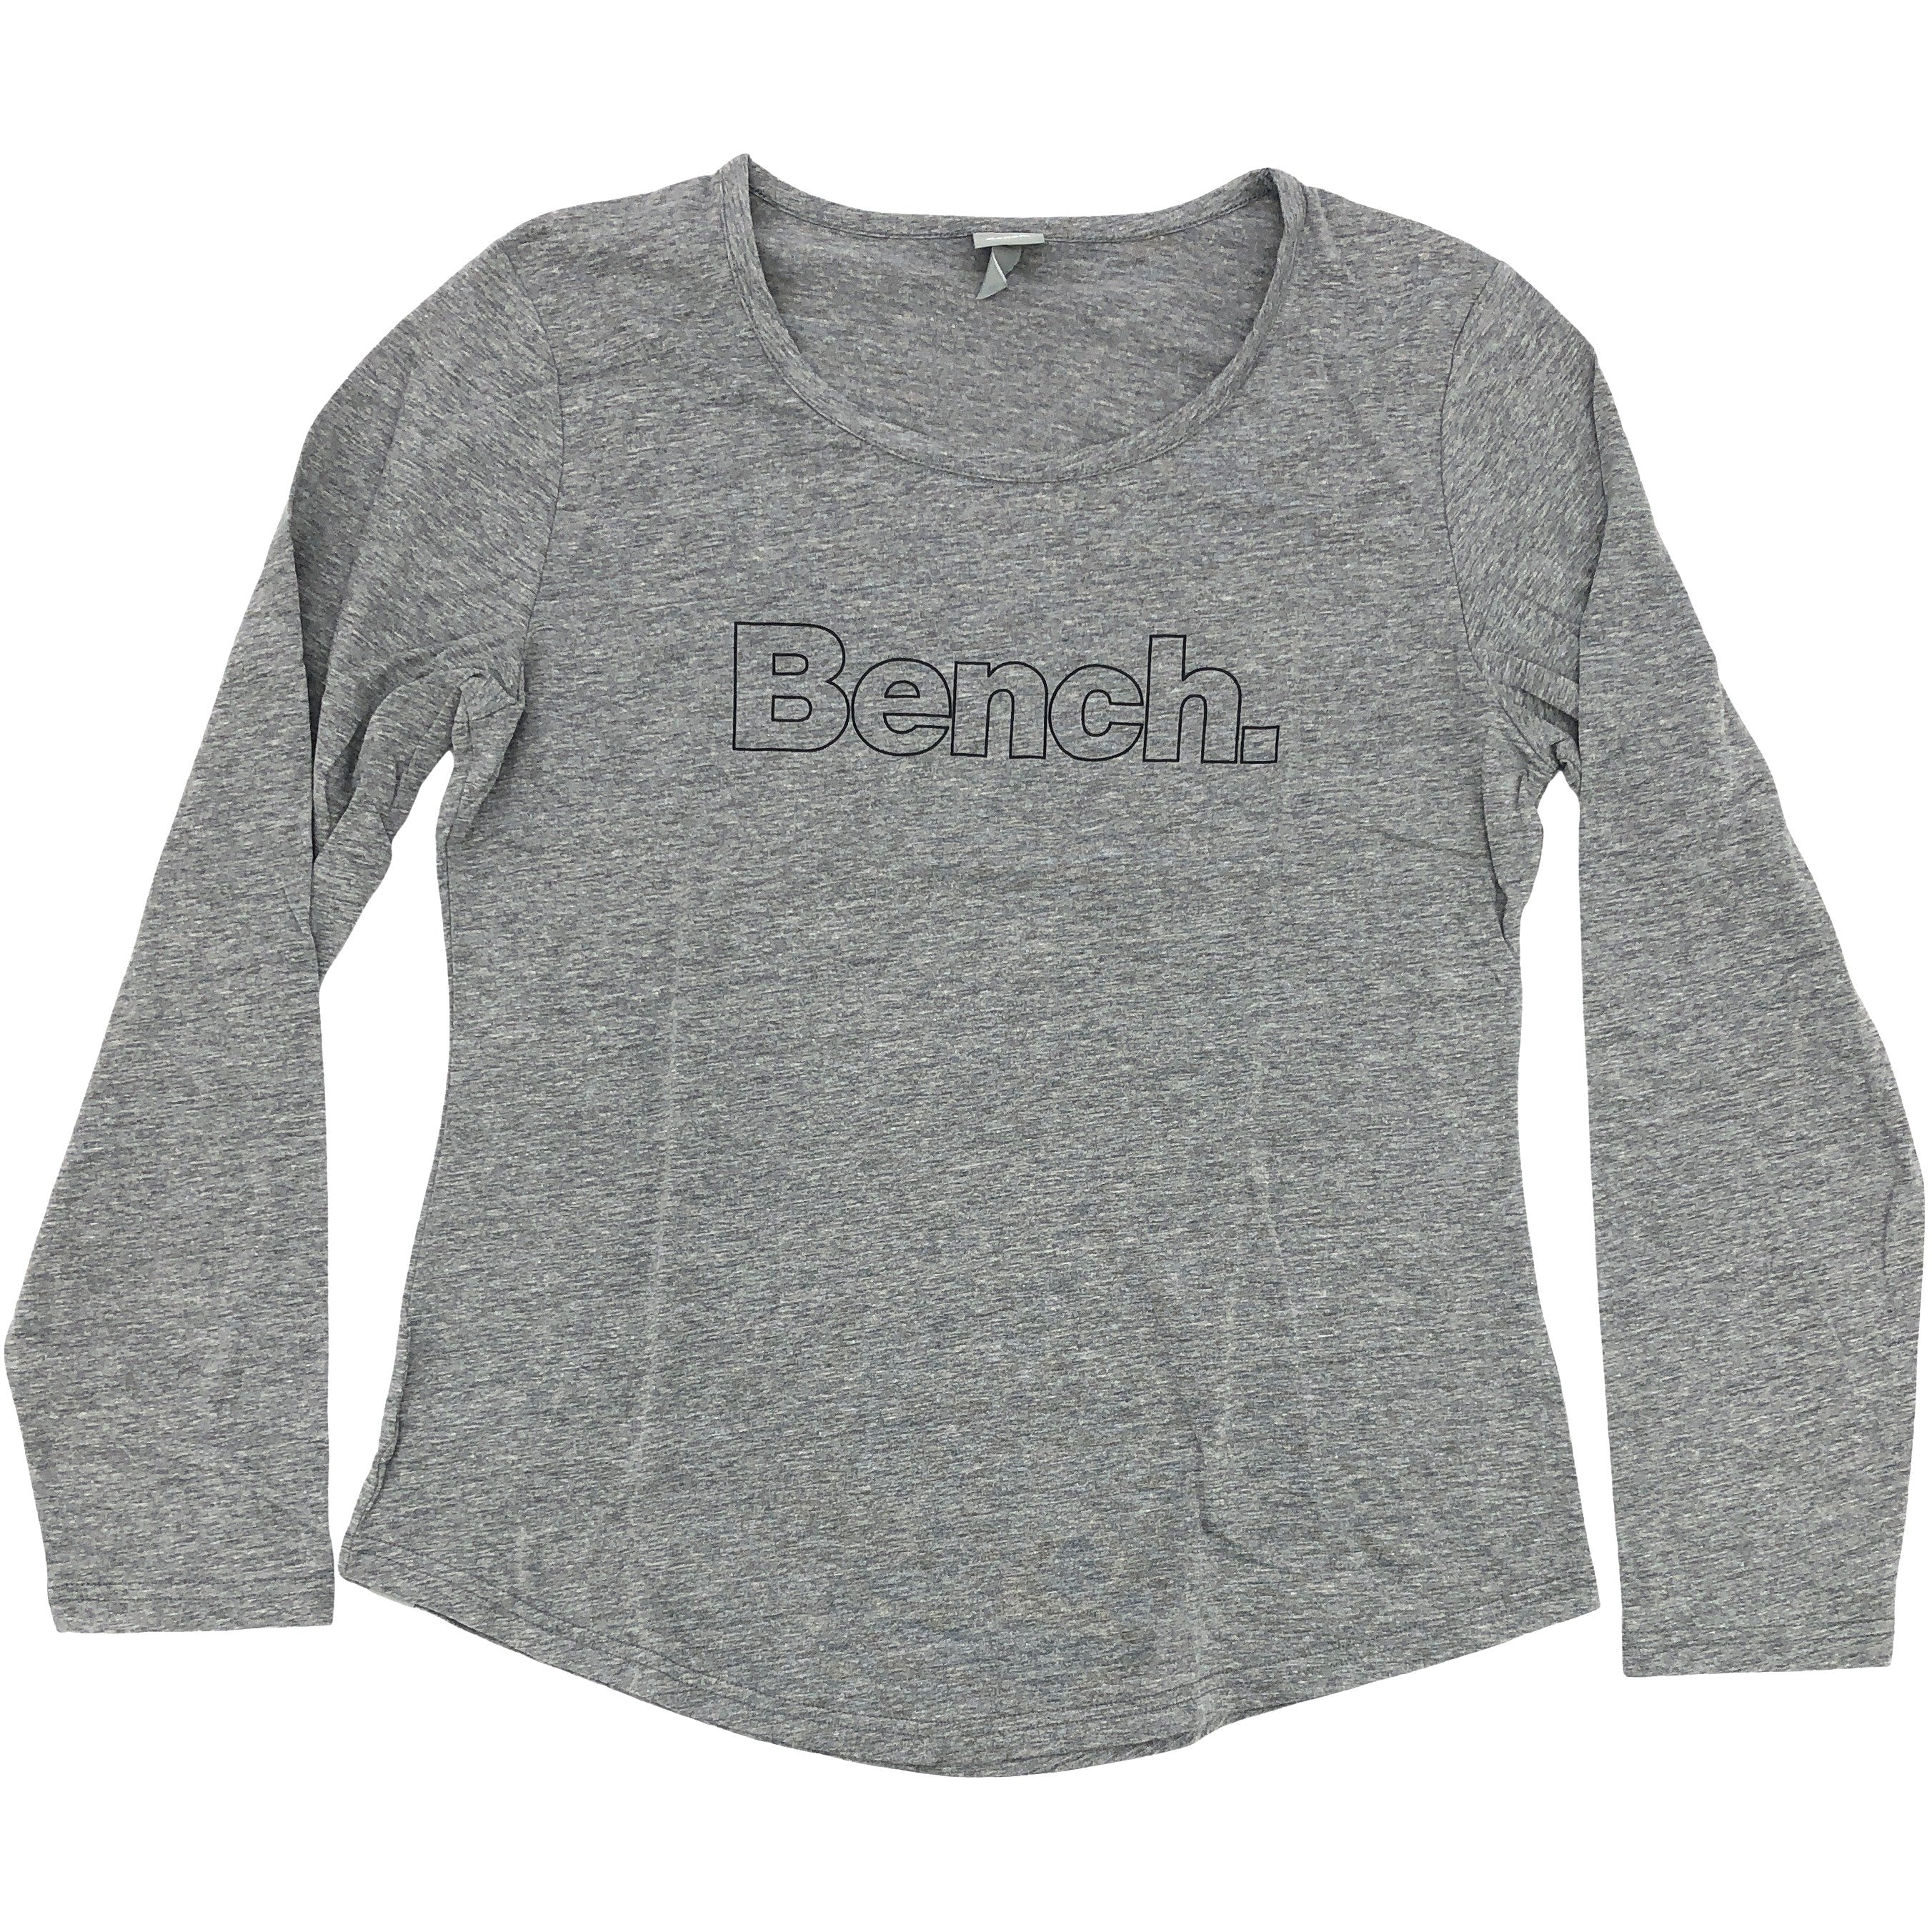 Bench Women's Long Sleeved Shirt / Grey / Size Small